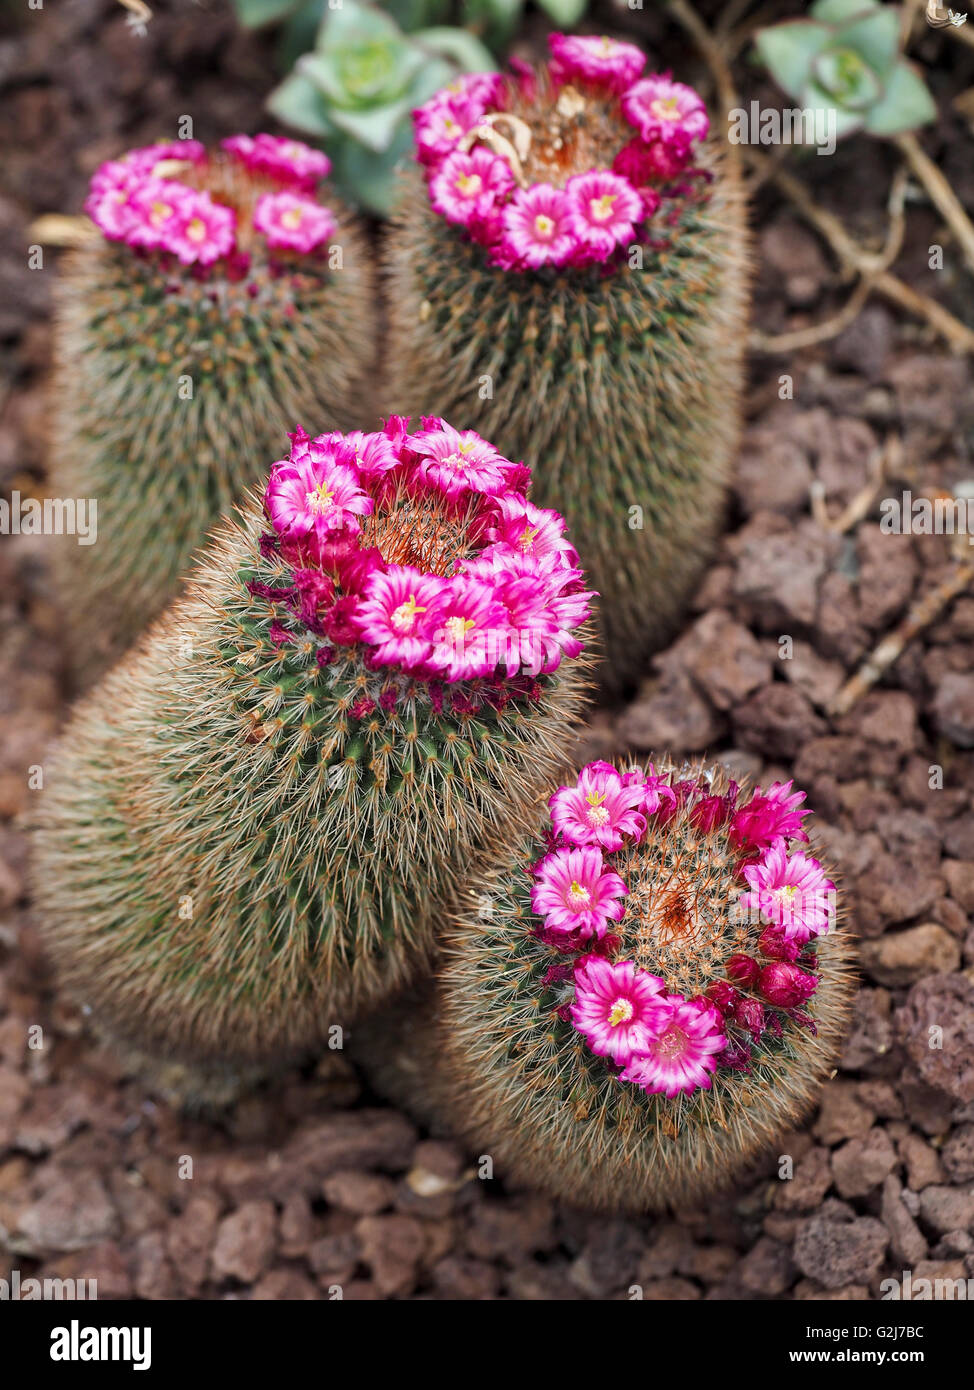 blooming cactus flower Photographed in Madrid Botanical Gardens Stock Photo